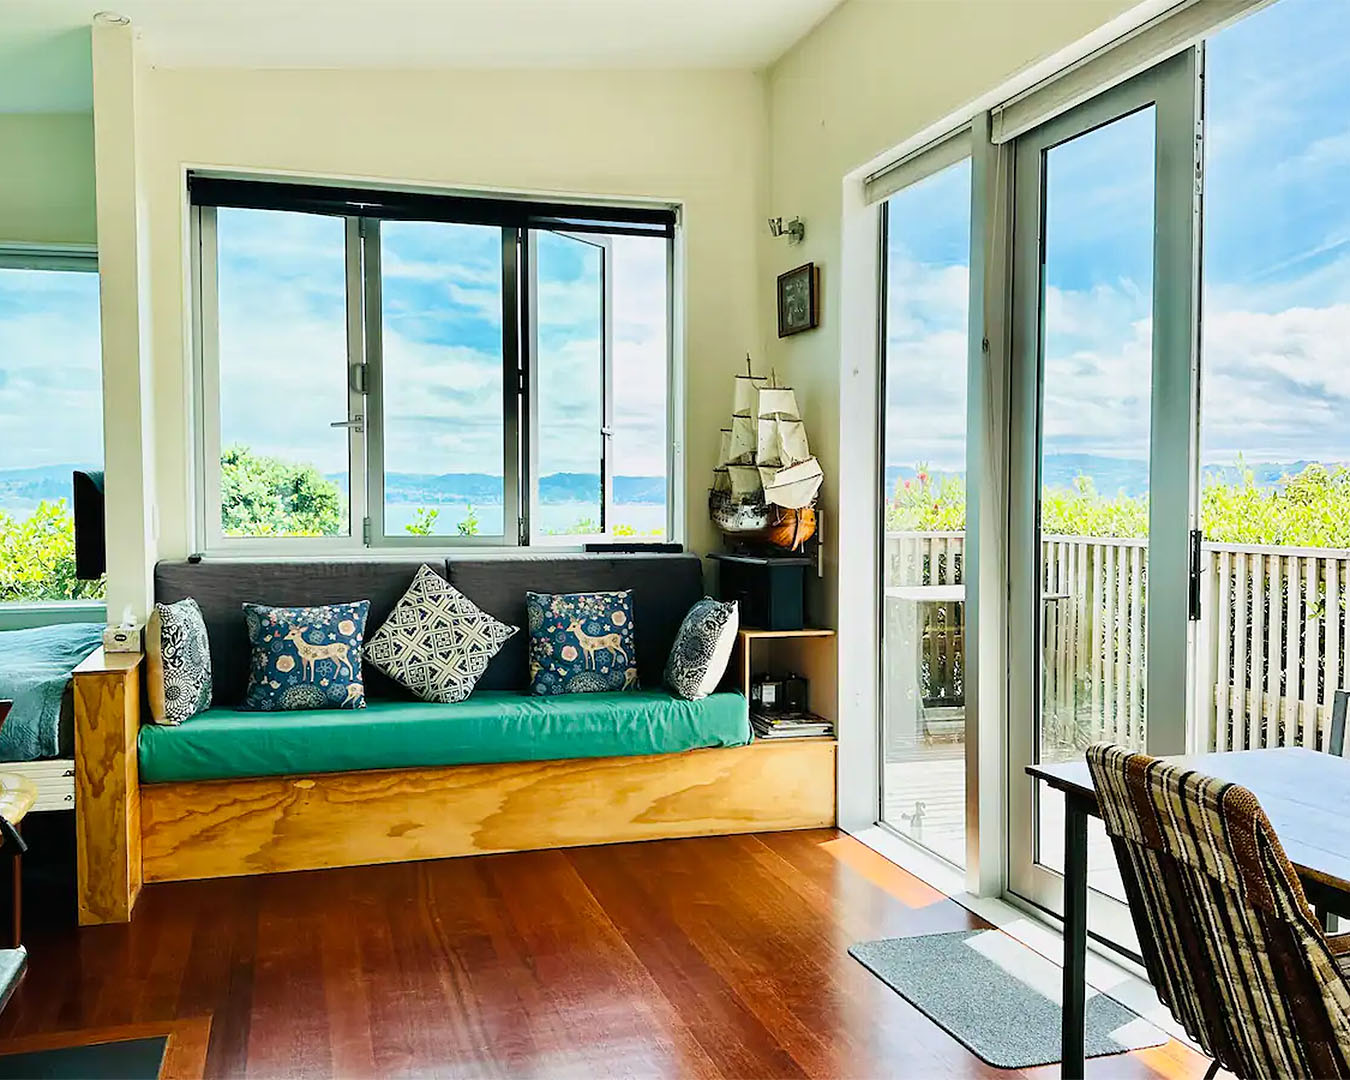 A sunny room looks out over Wellington Harbour, definitely one of the best pet friendly accommodation options in new zealand.